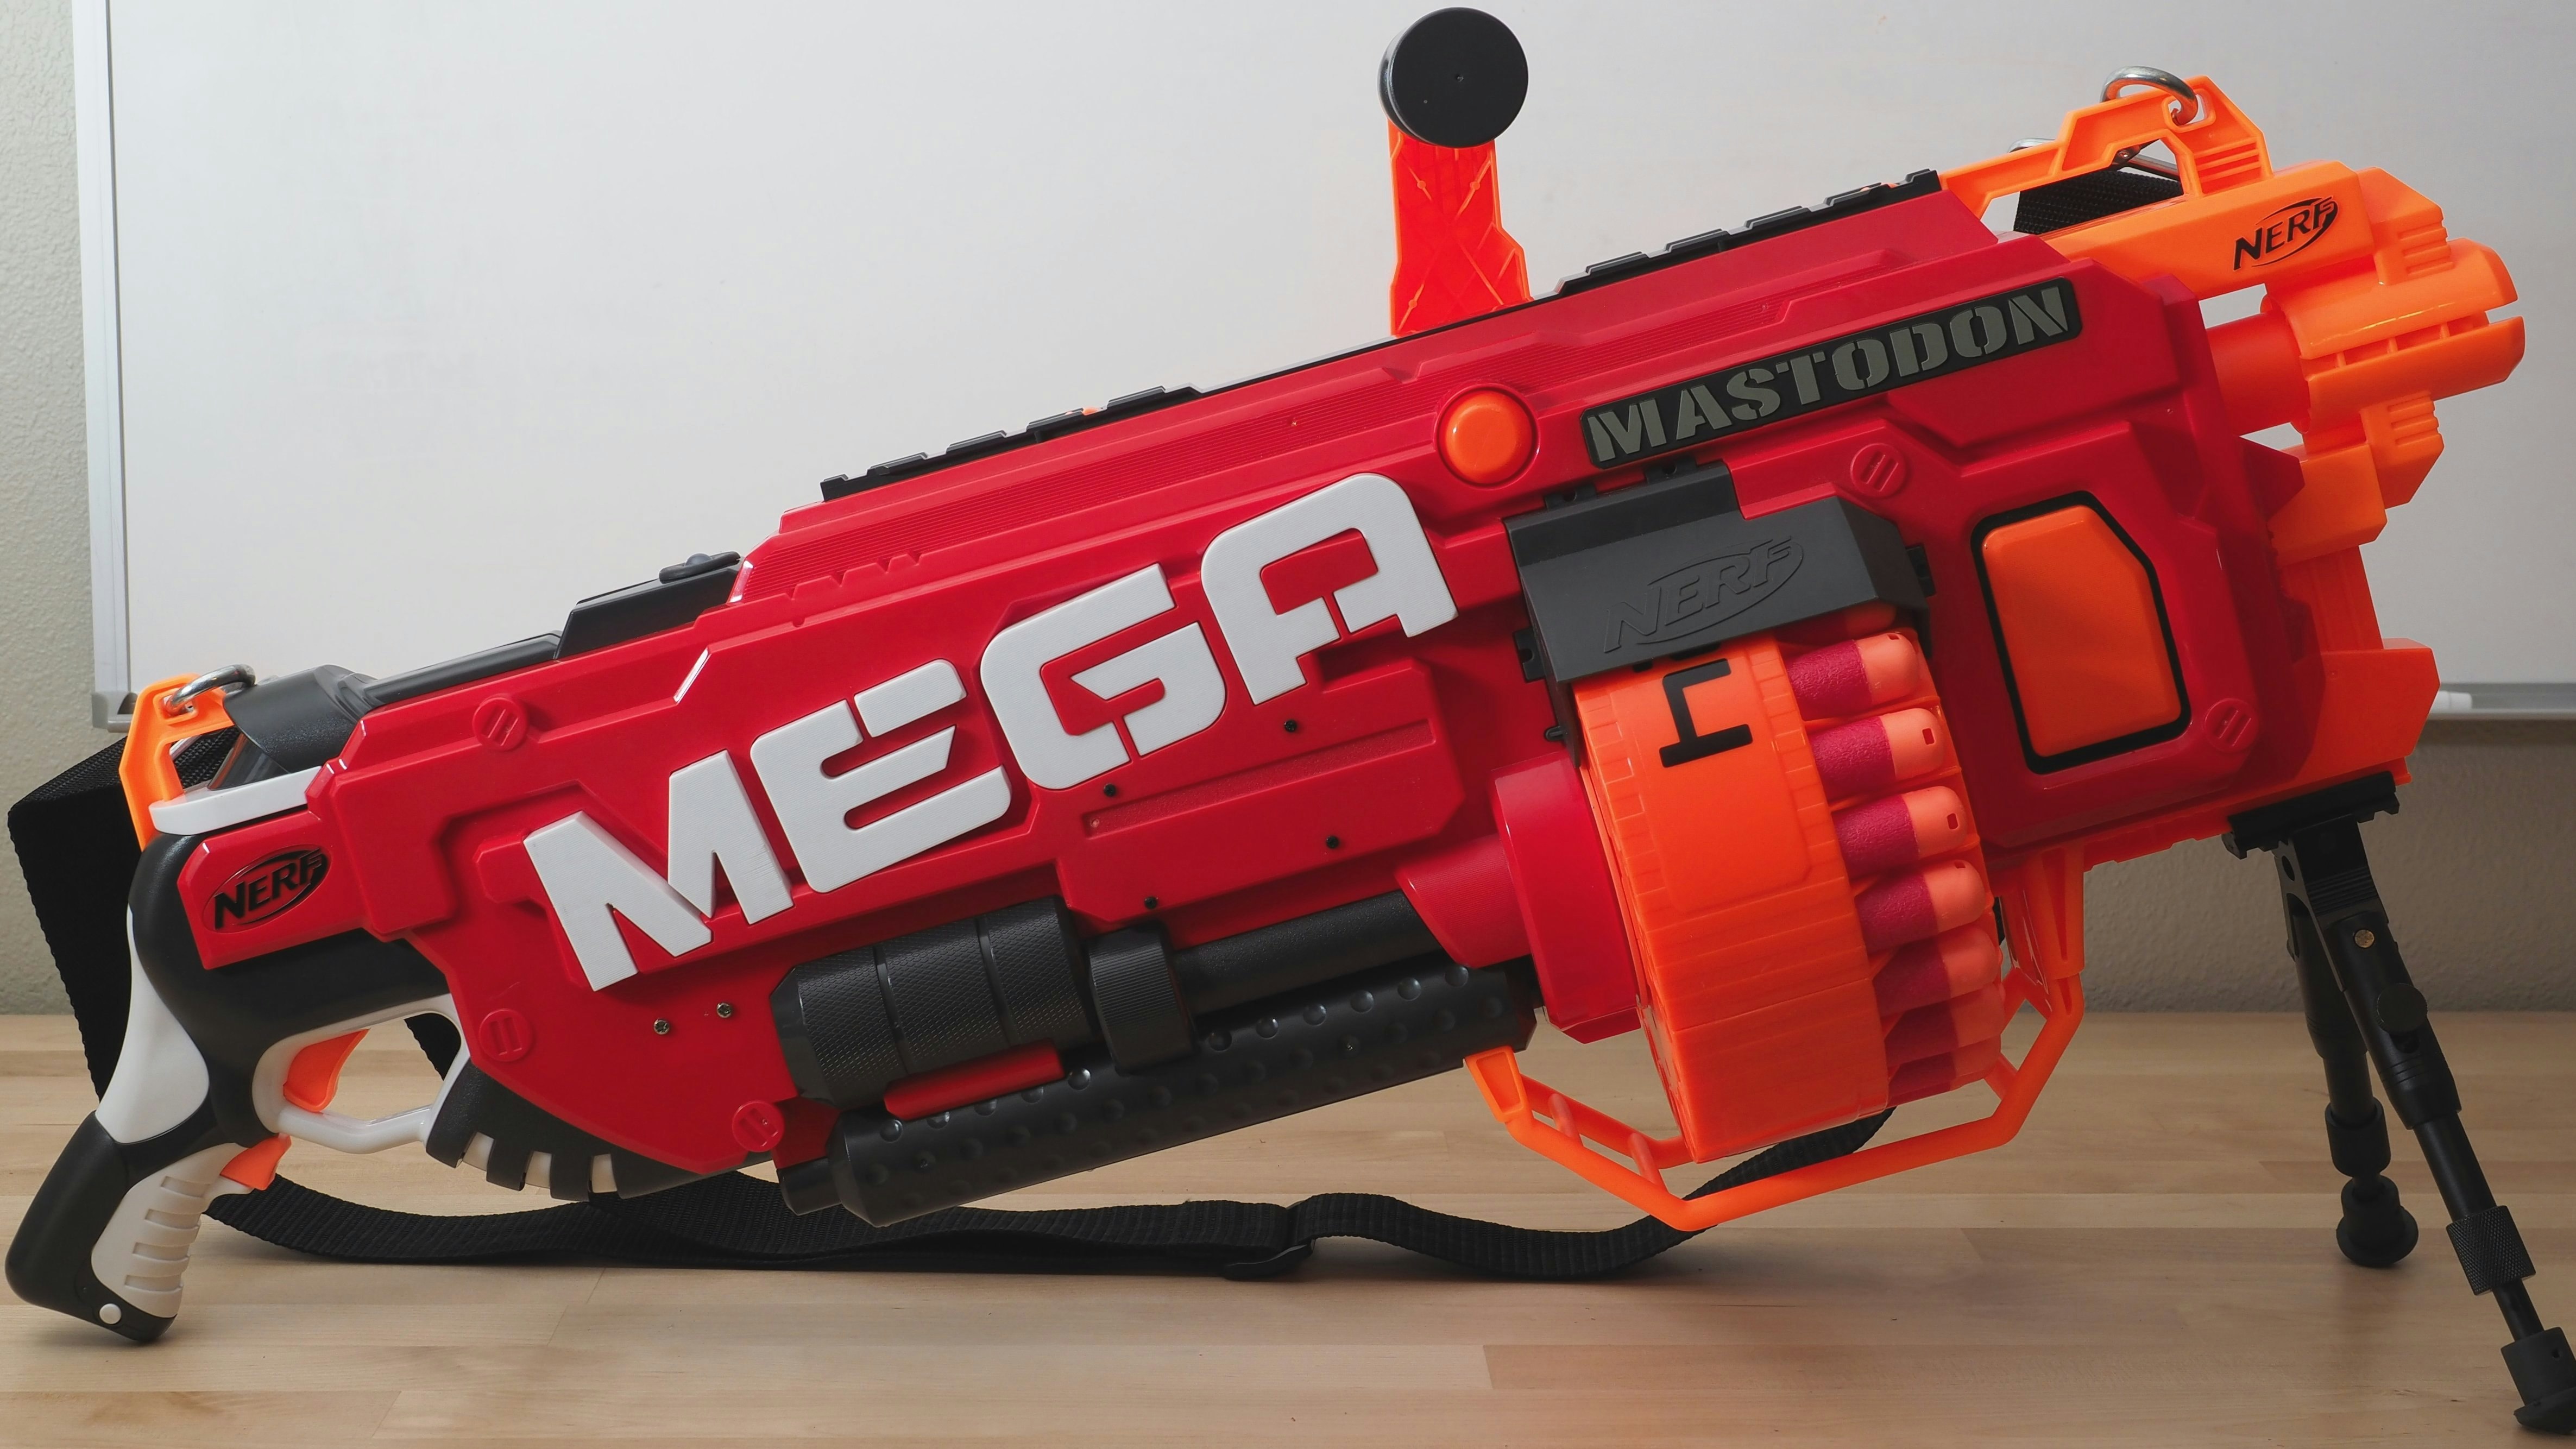 Upgrading a Nerf Blaster with a for Fly-by-Wire -